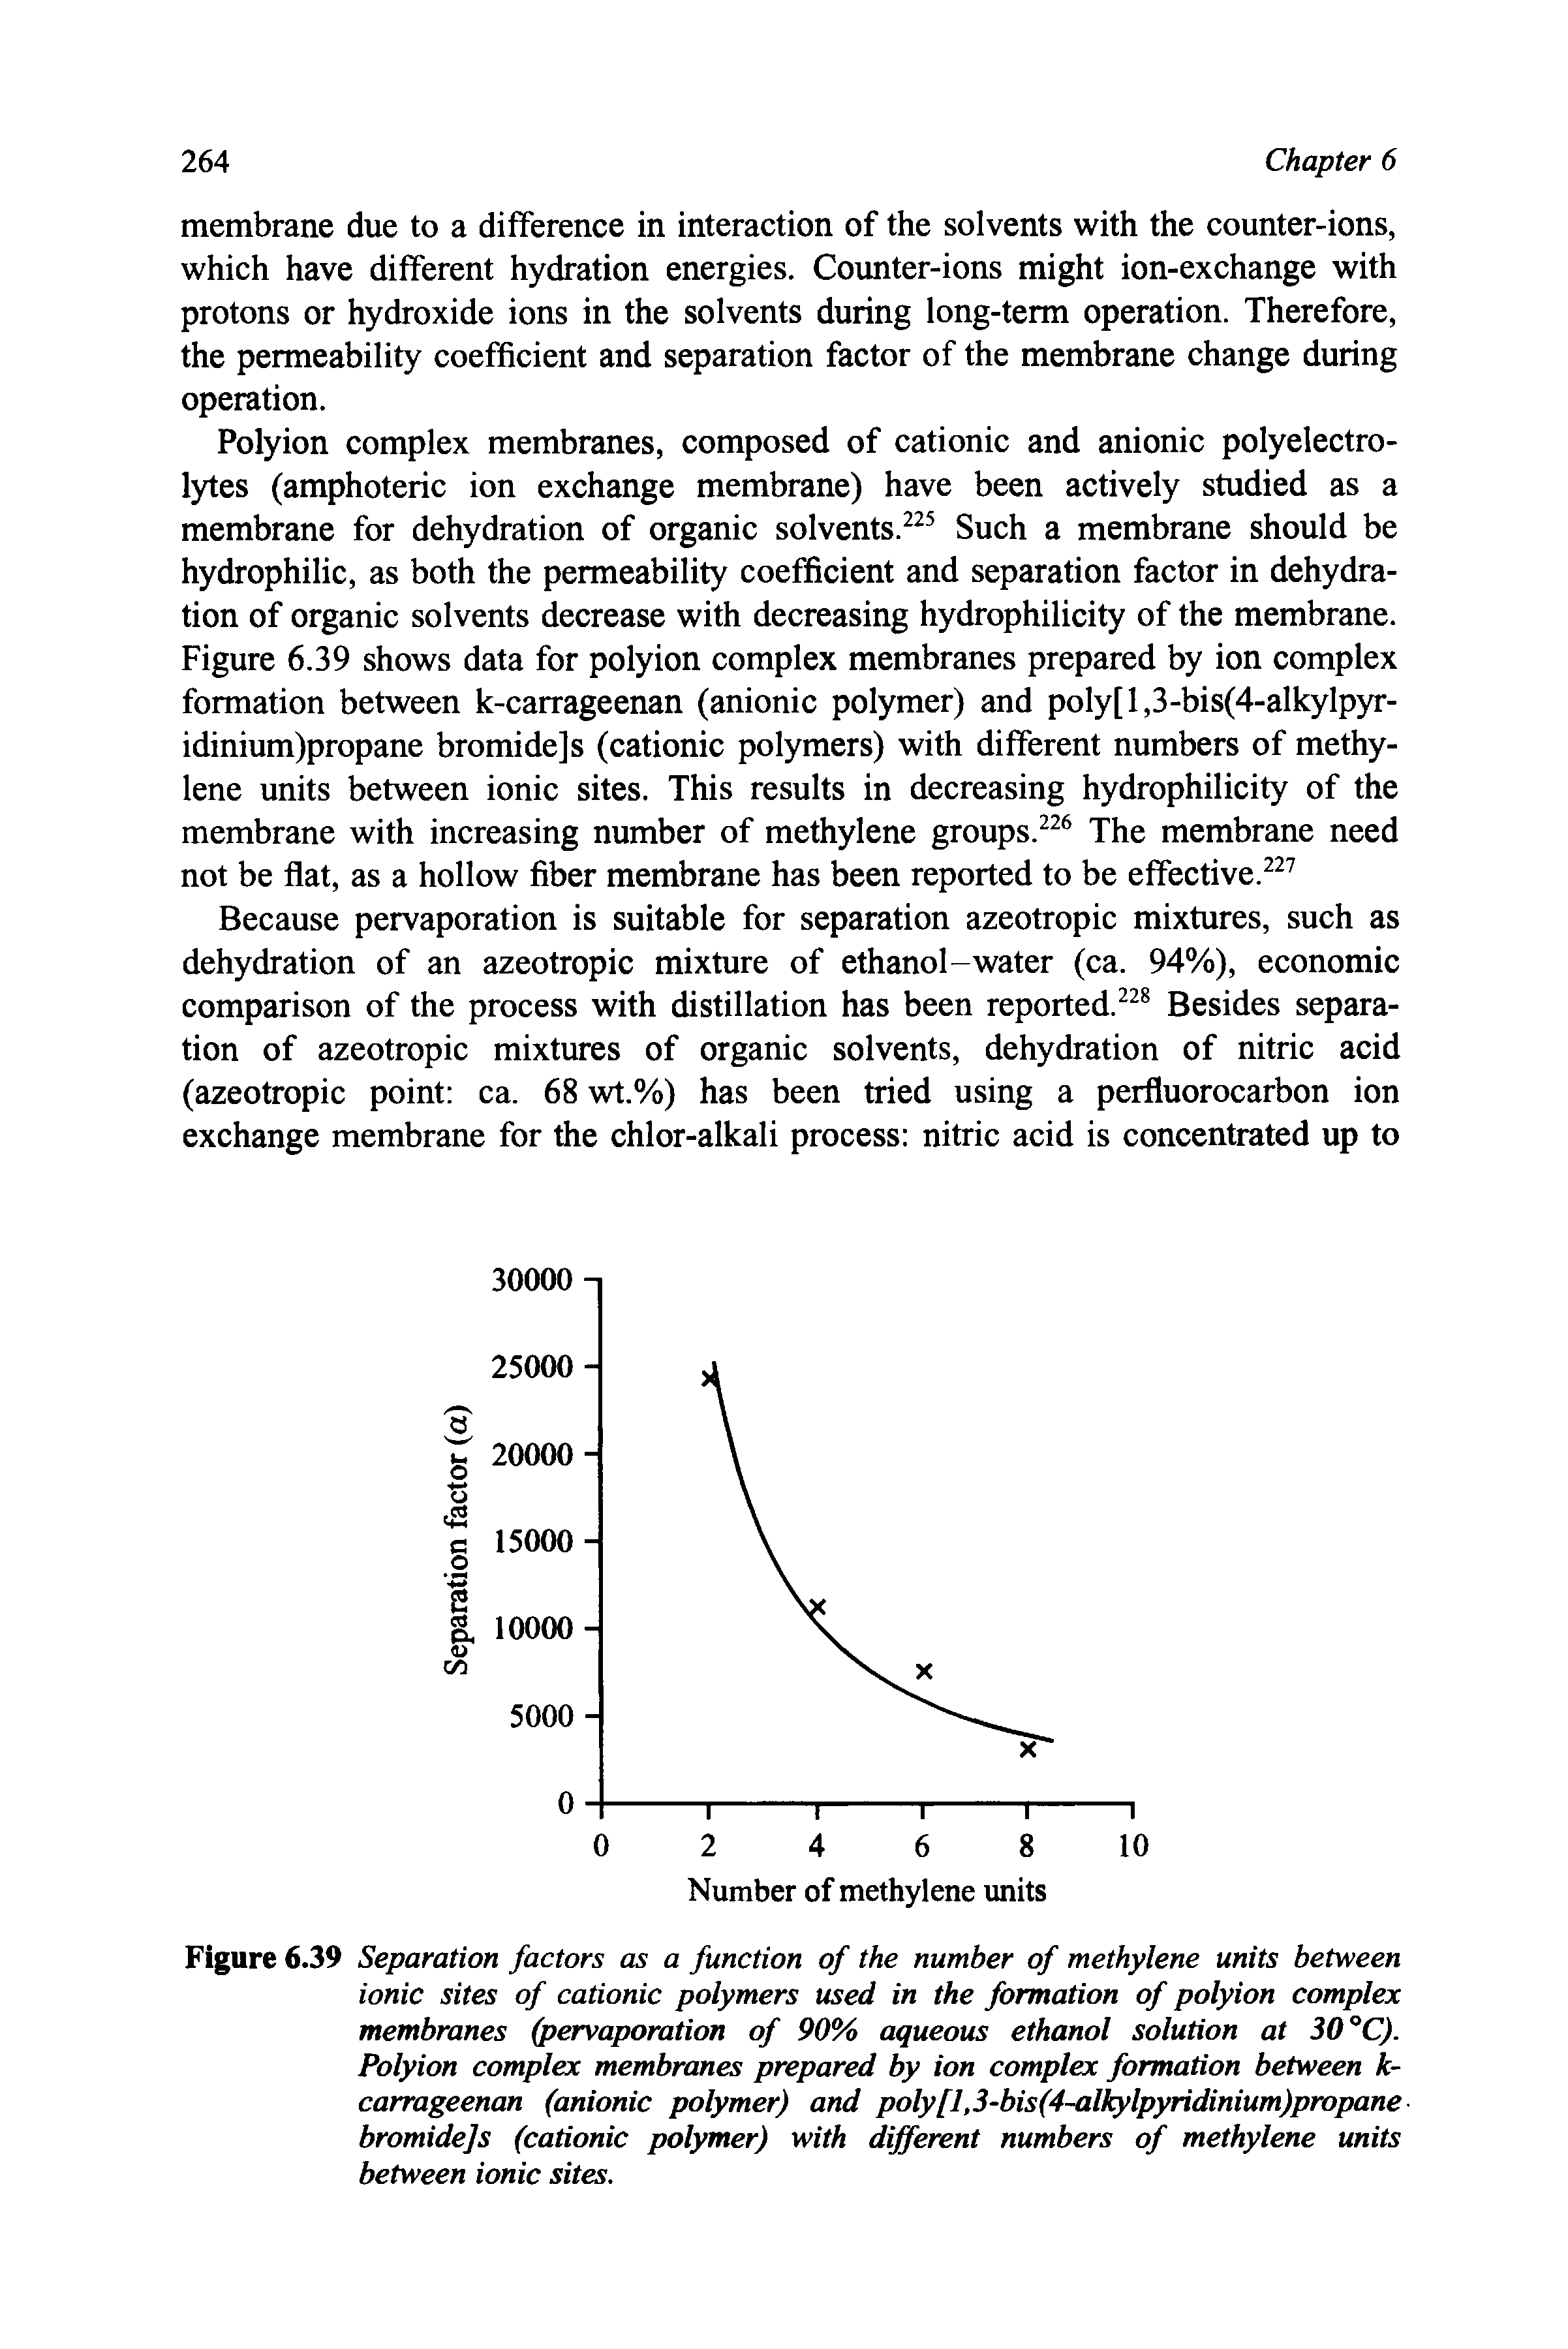 Figure 6.39 Separation factors as a function of the number of methylene units between ionic sites of cationic polymers used in the formation of polyion complex membranes (pervaporation of 90% aqueous ethanol solution at 30 °C). Polyion complex membranes prepared by ion complex formation between k-carrageenan (anionic polymer) and poly[l,3-bis(4-alkylpyridinium)propane bromidejs (cationic polymer) with different numbers of methylene units between ionic sites.